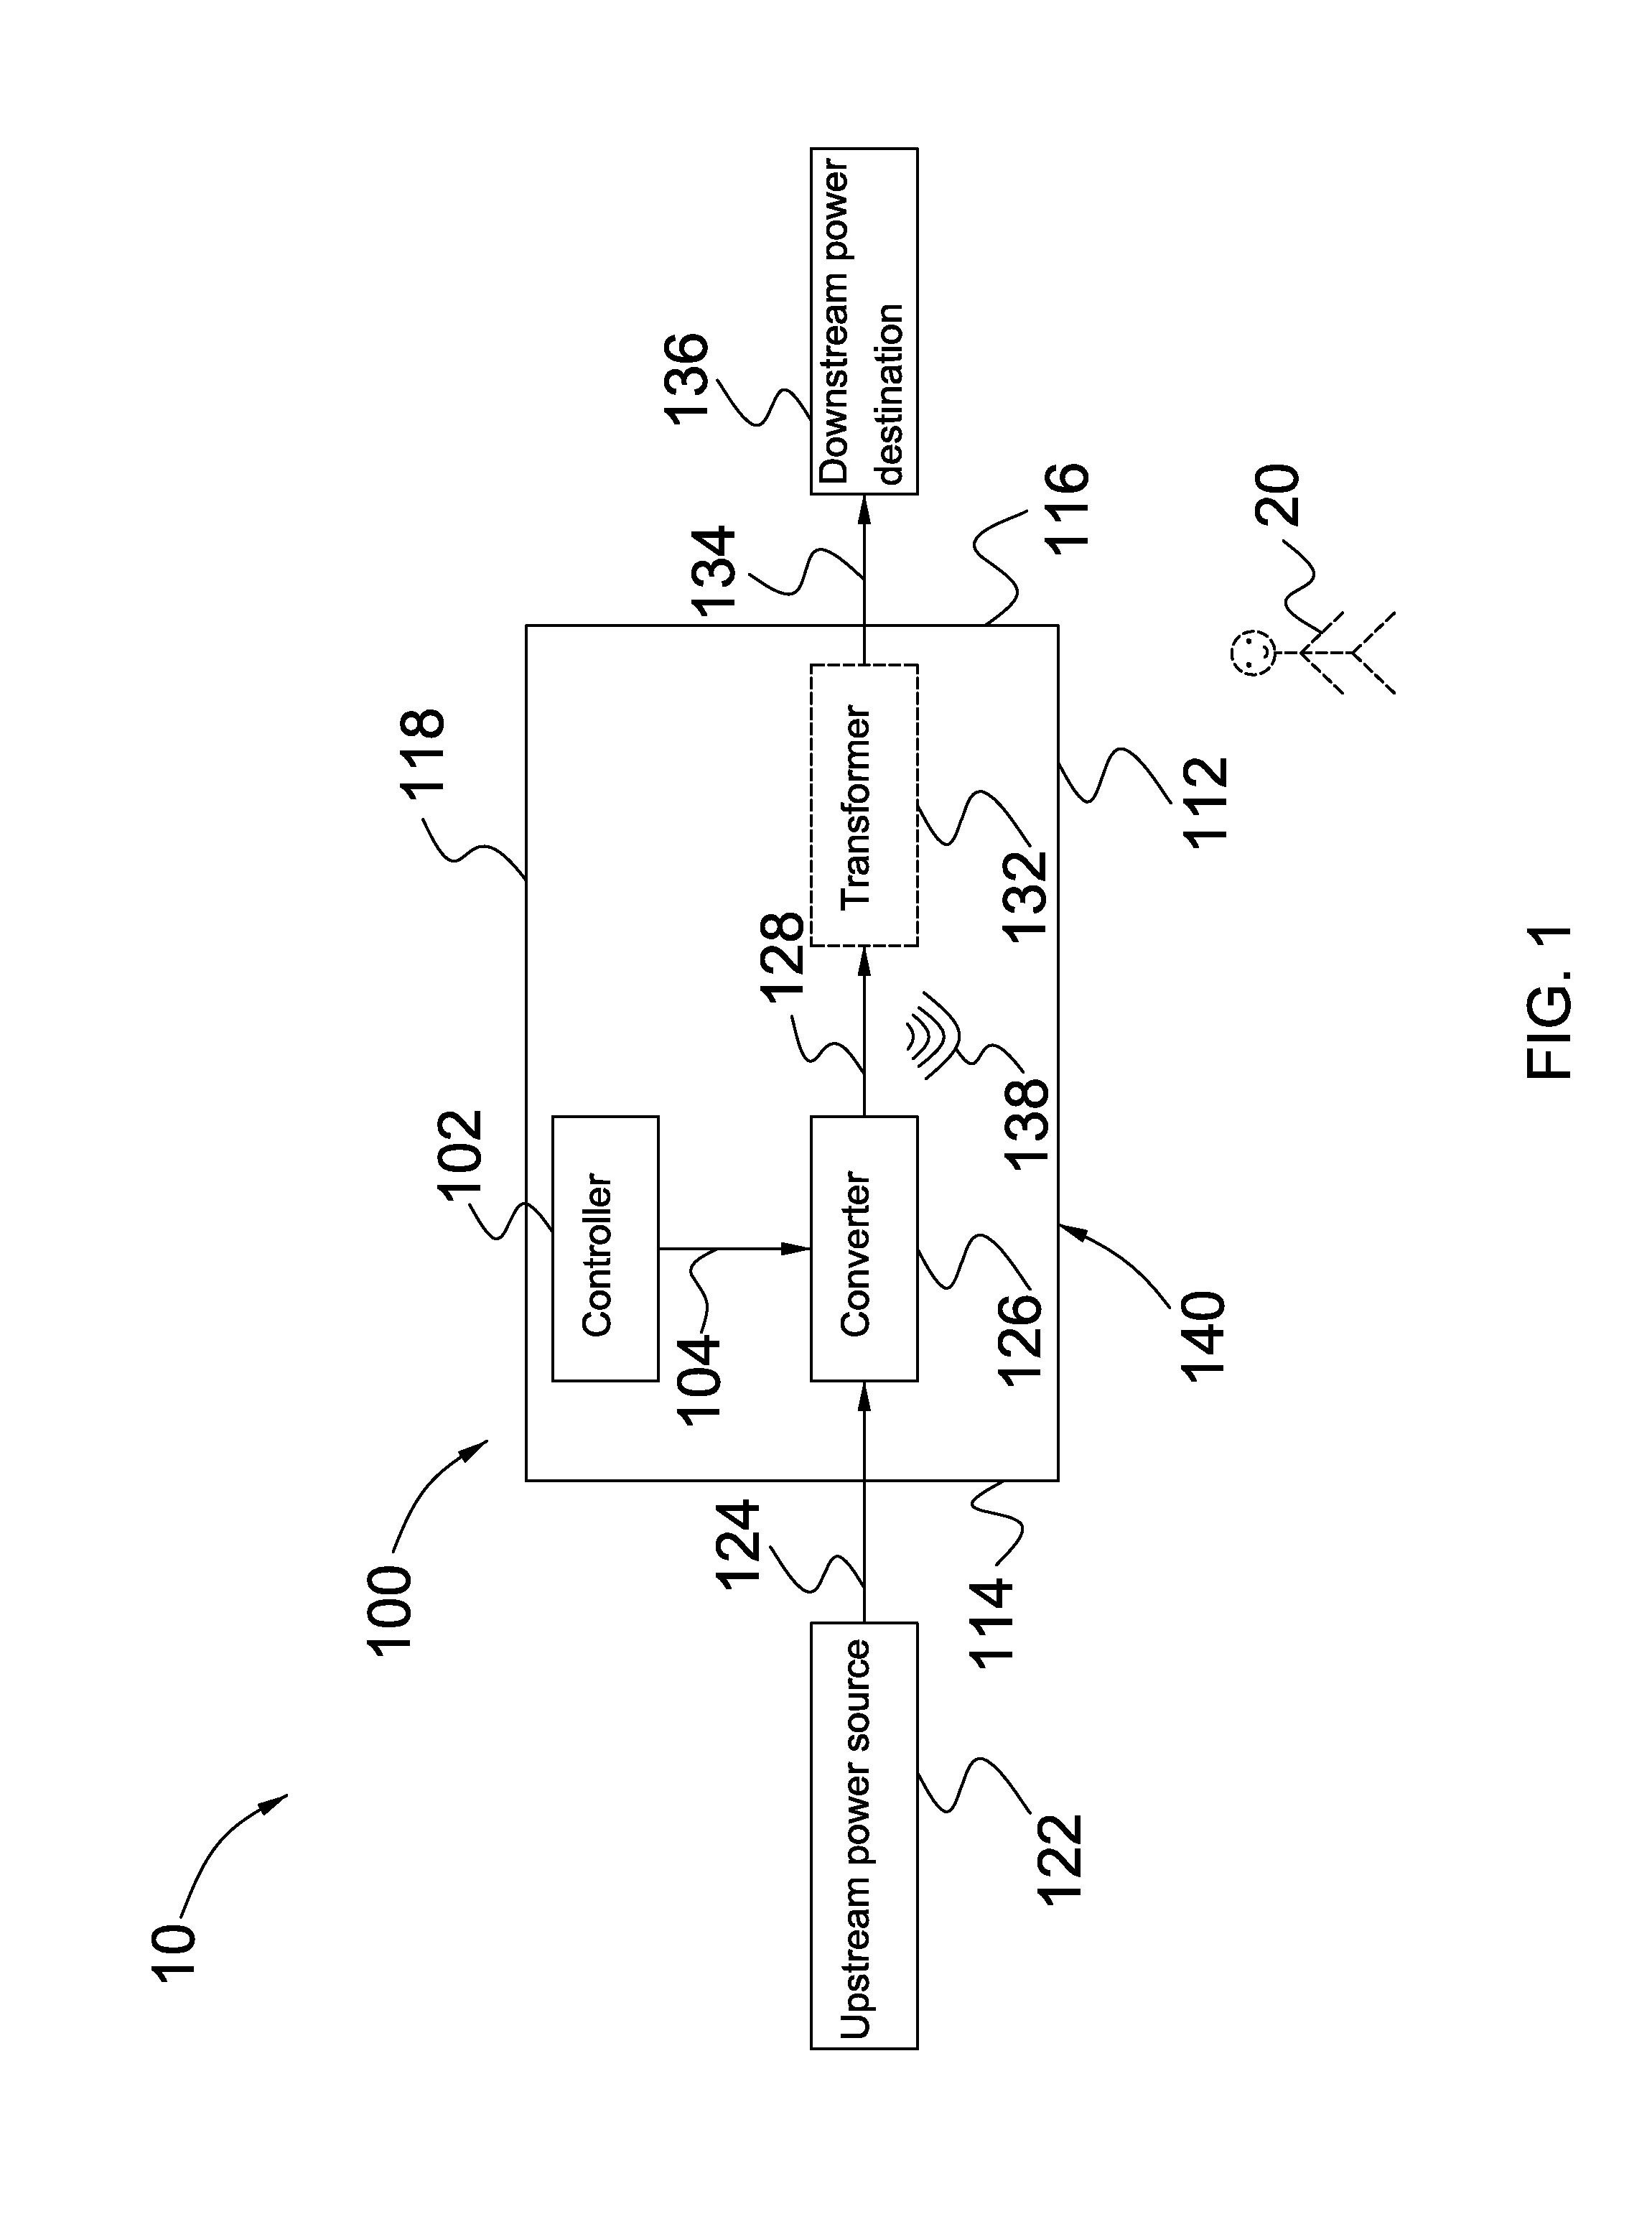 Shielding structure for power conversion system and method thereof